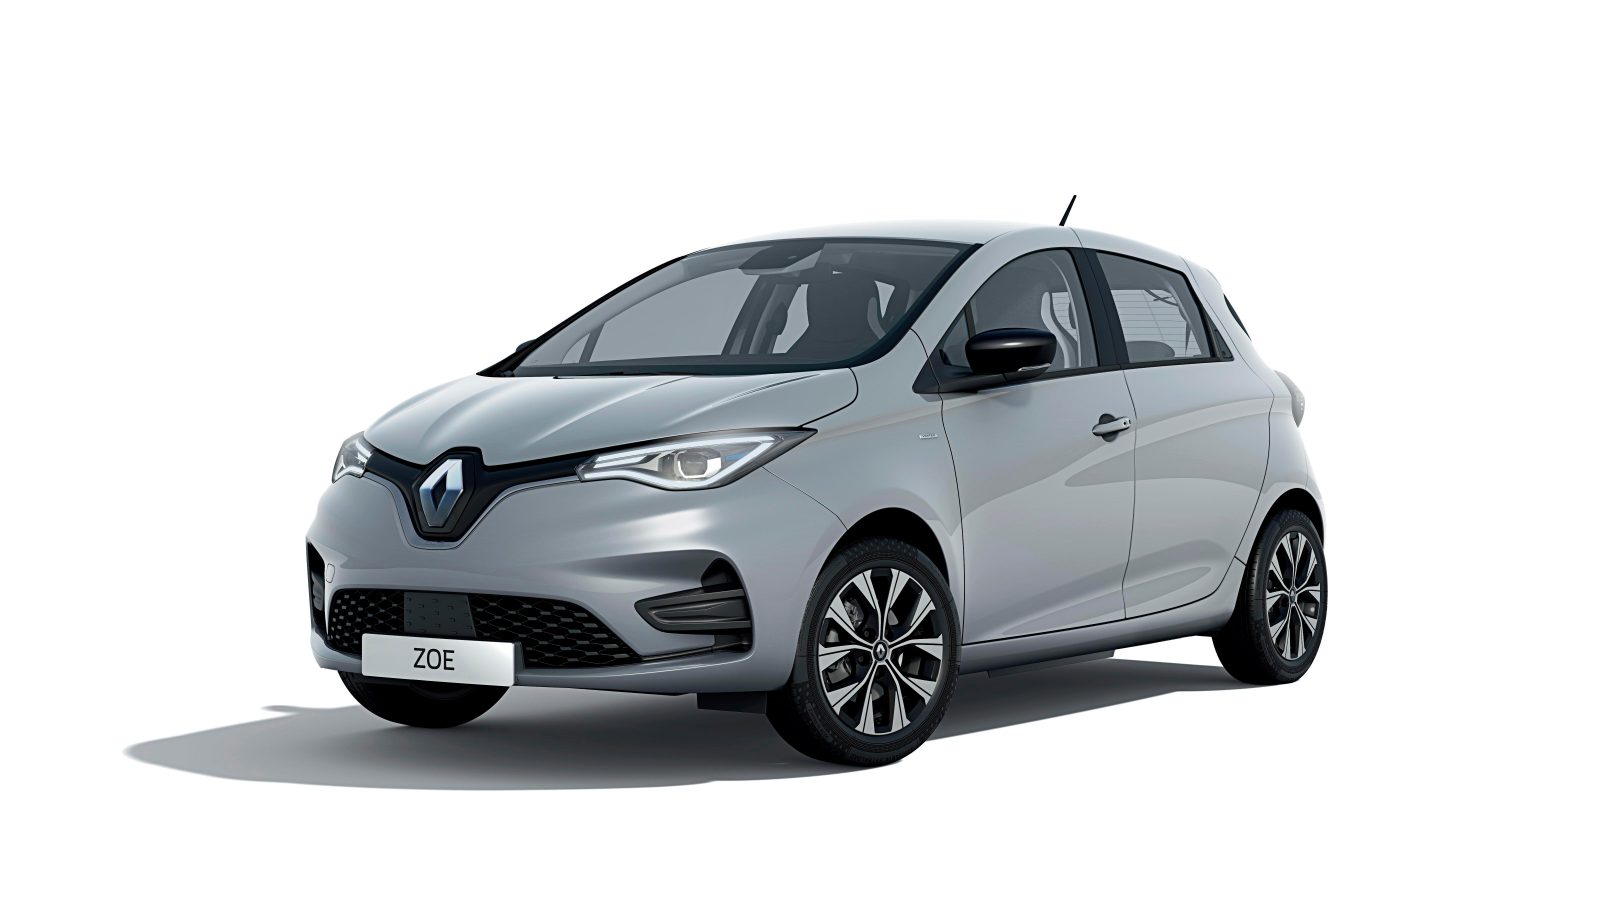 https://electrek.co/wp-content/uploads/sites/3/2021/12/Renault-ZOE-Limited-2021.jpg?quality=82&strip=all&w=1600